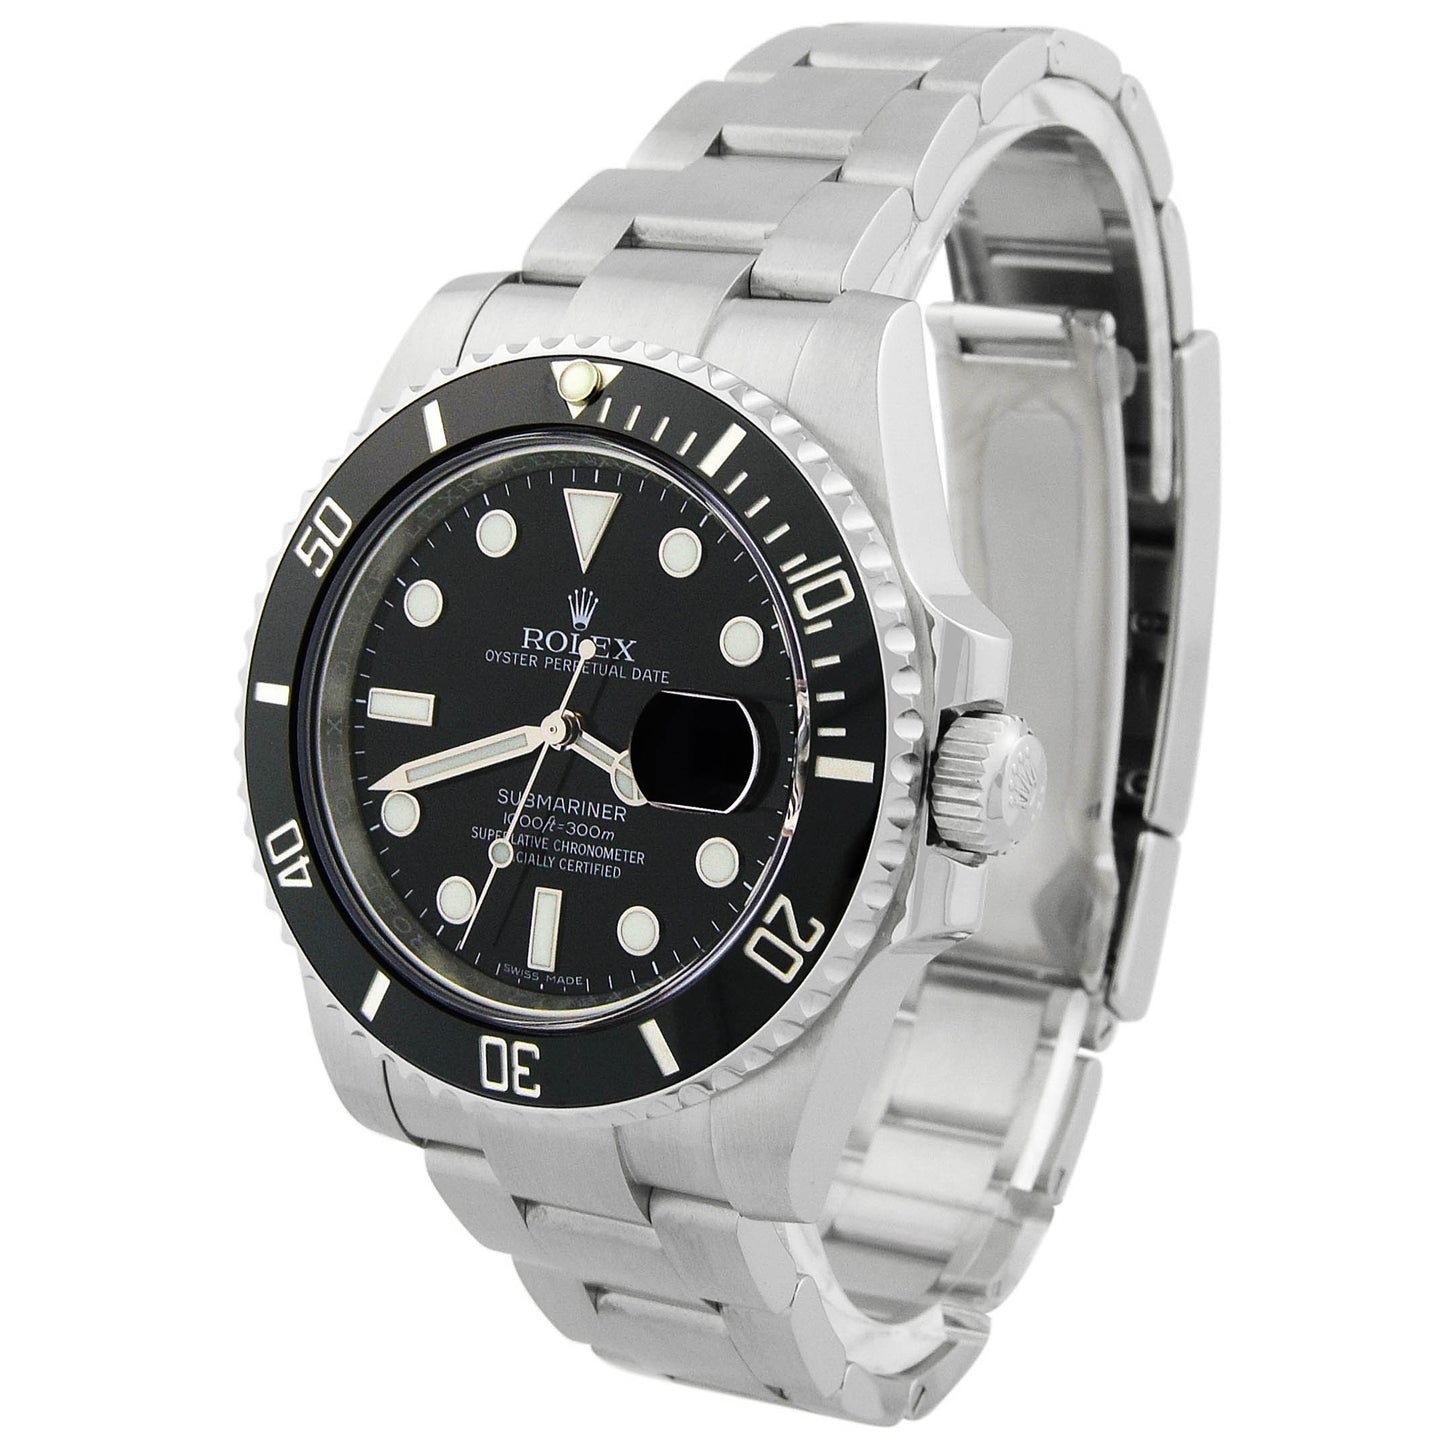 Rolex Submariner Date Stainless Steel 40mm Black Dot Dial Watch Reference #: 116610LN - Happy Jewelers Fine Jewelry Lifetime Warranty